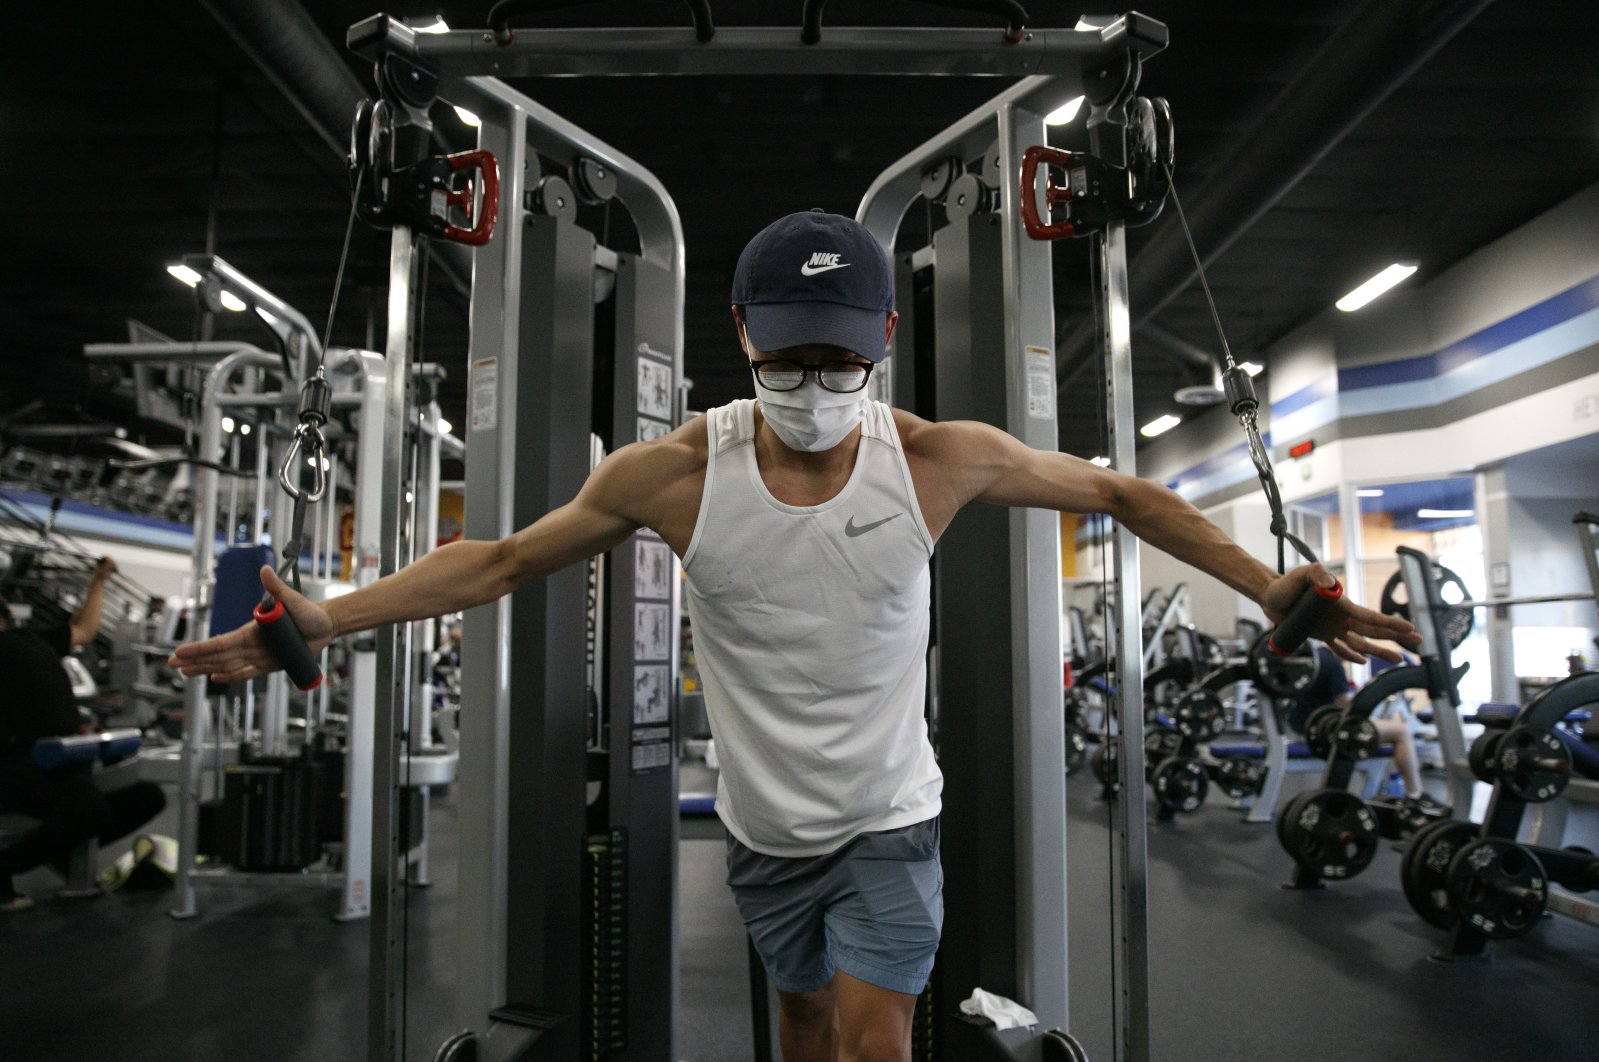 Benji Xiang, 32, wears a mask while working out at a gym in Los Angeles, California, U.S., June 26, 2020. (AP Photo)